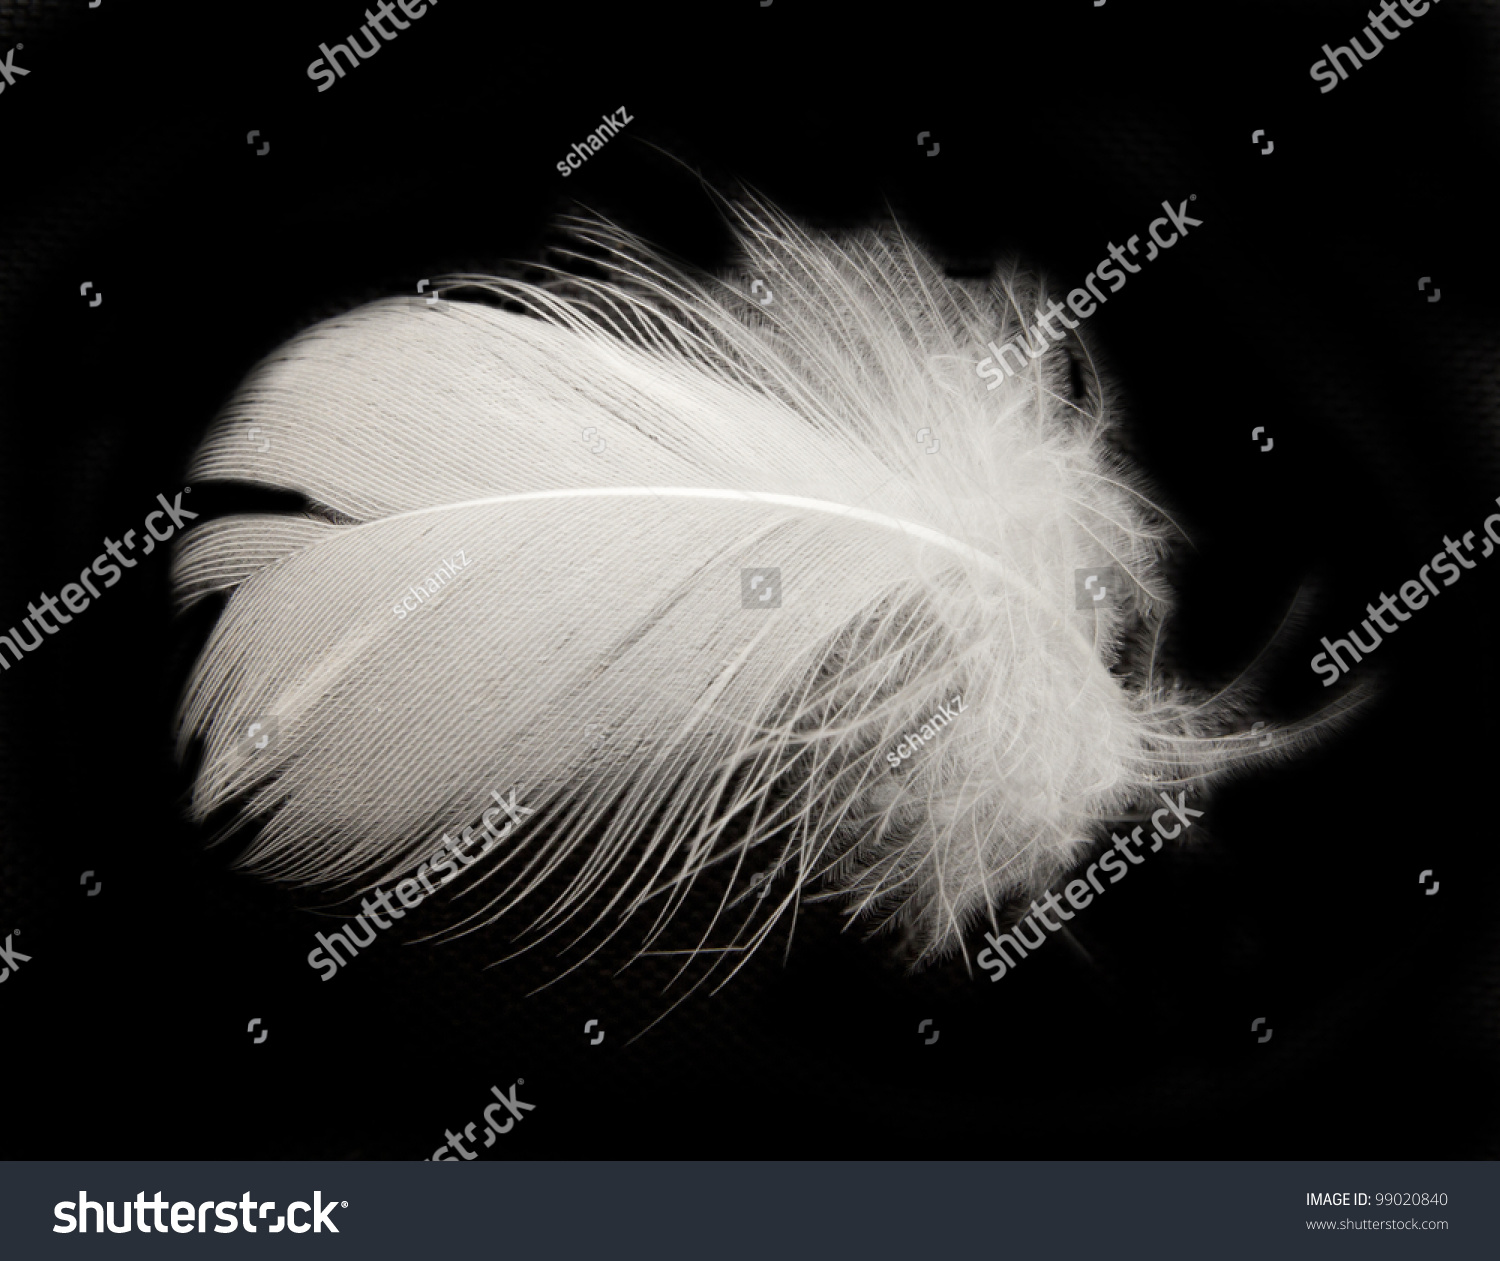 feather on the black background #99020840